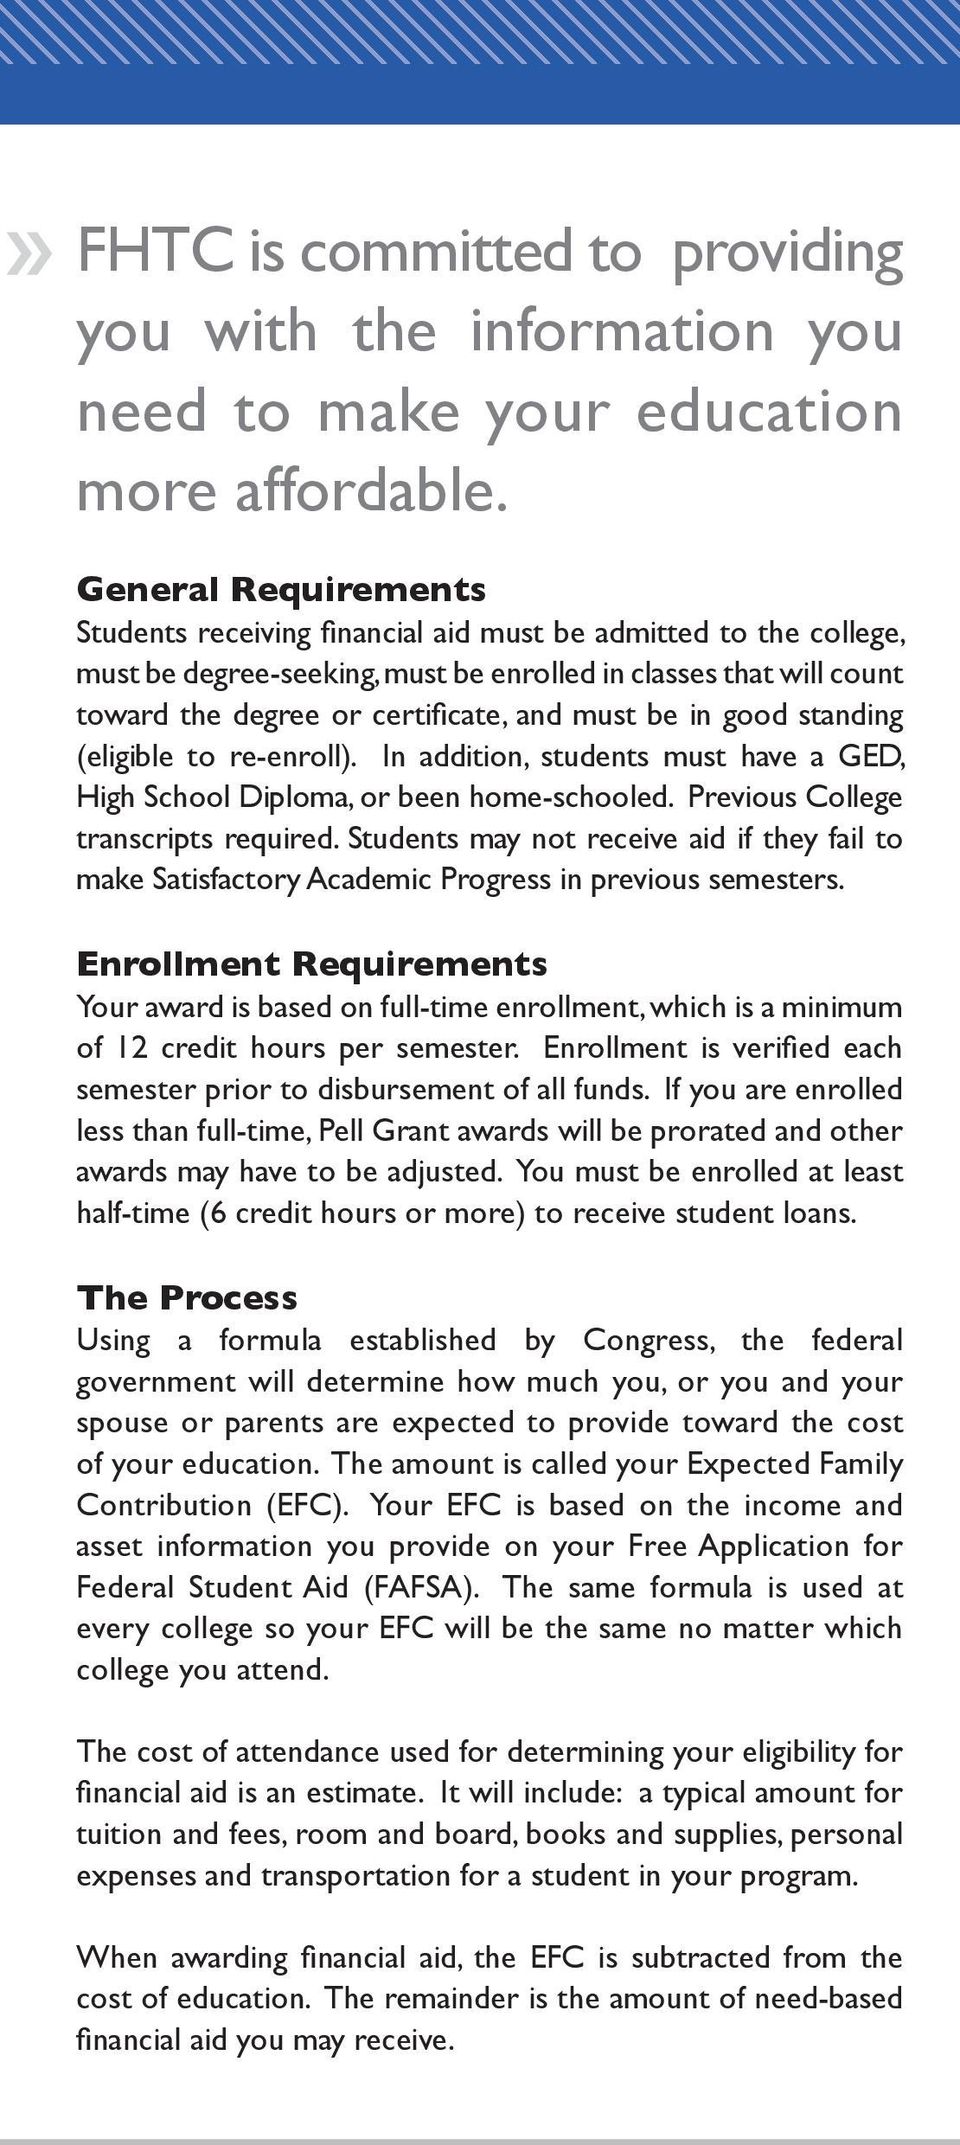 be in good standing (eligible to re-enroll). In addition, students must have a GED, High School Diploma, or been home-schooled. Previous College transcripts required.